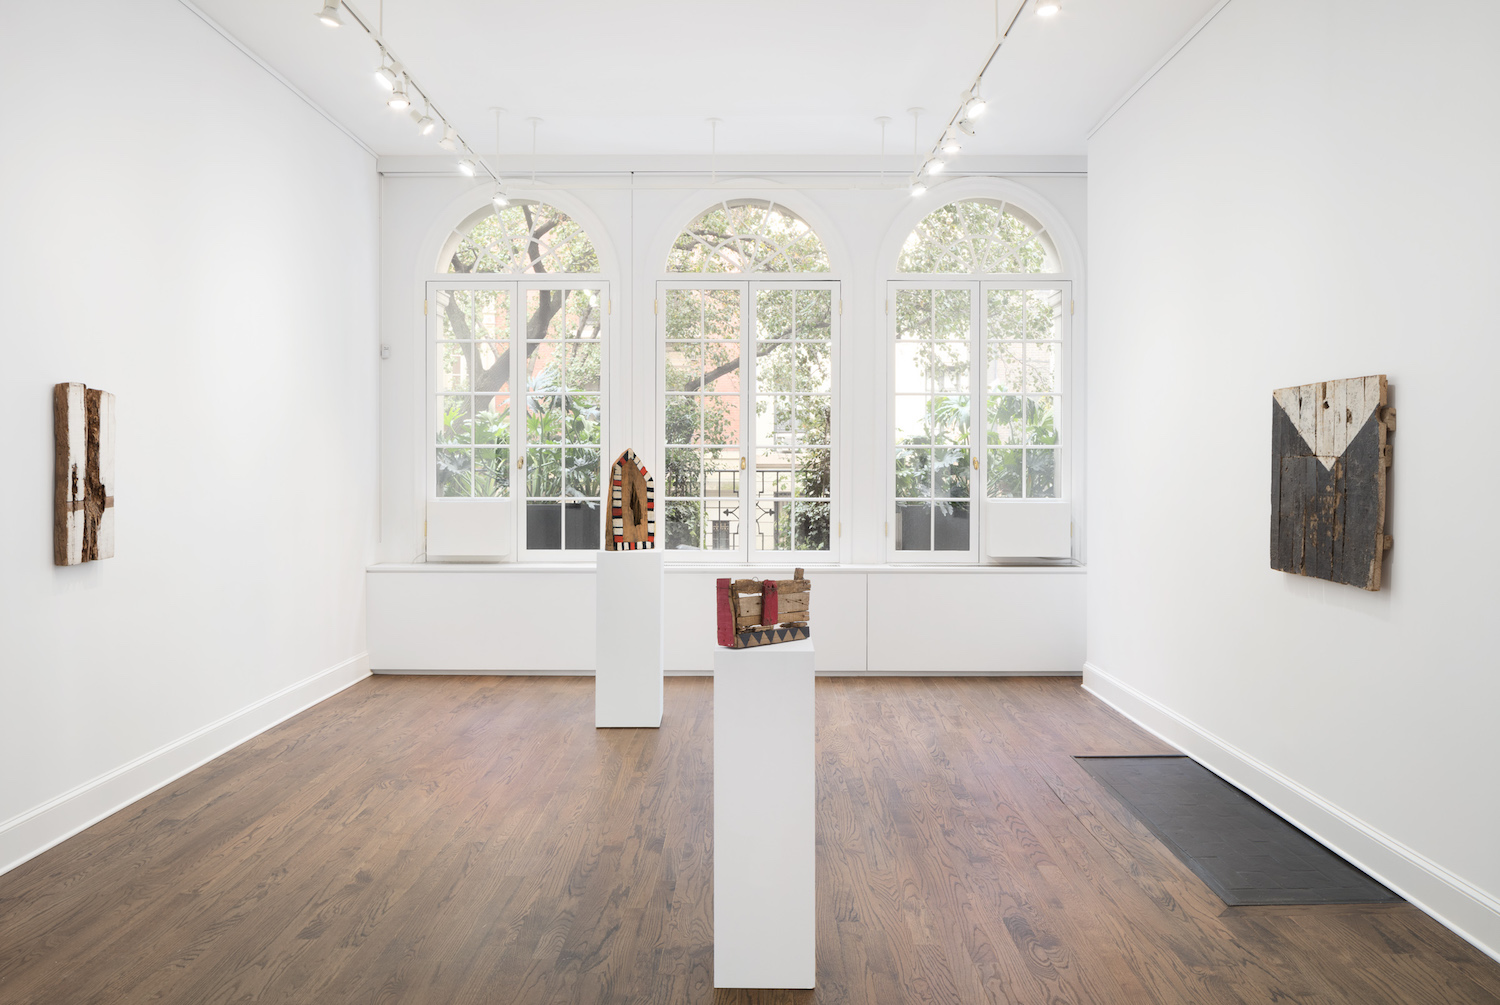 Installation view, Celso Renato at Mendes Wood